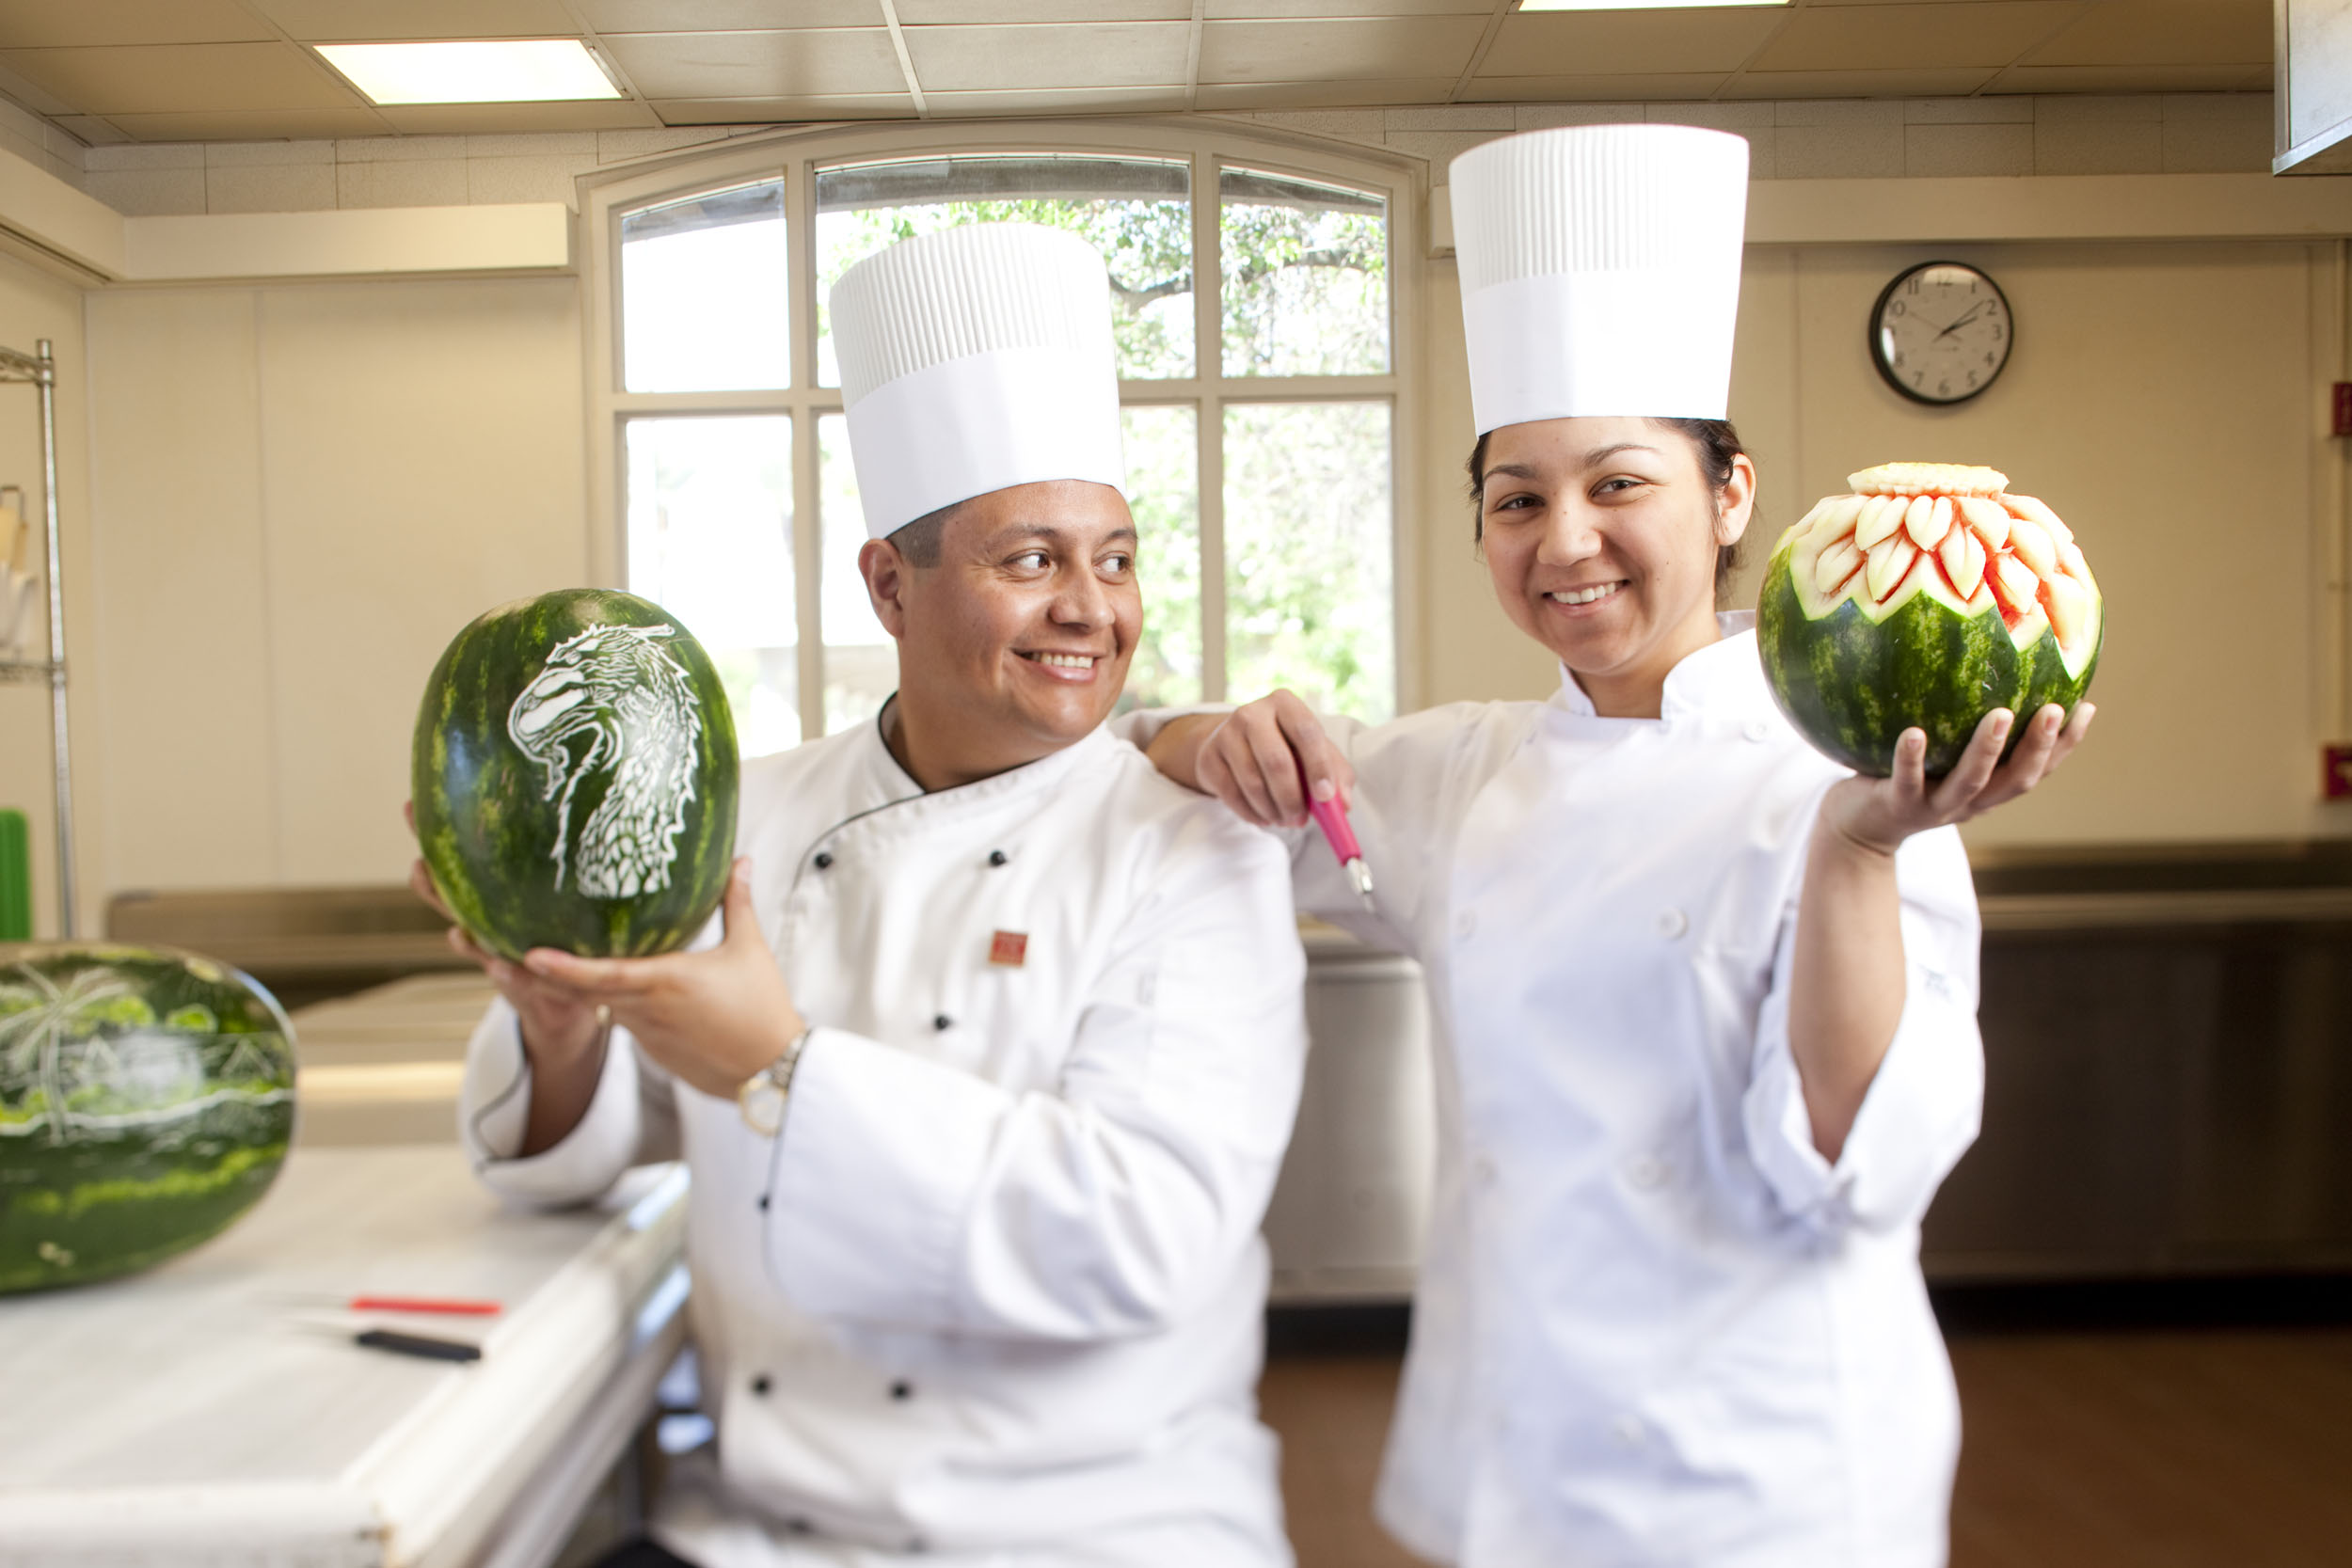 Culinary students showing Watermelon carving